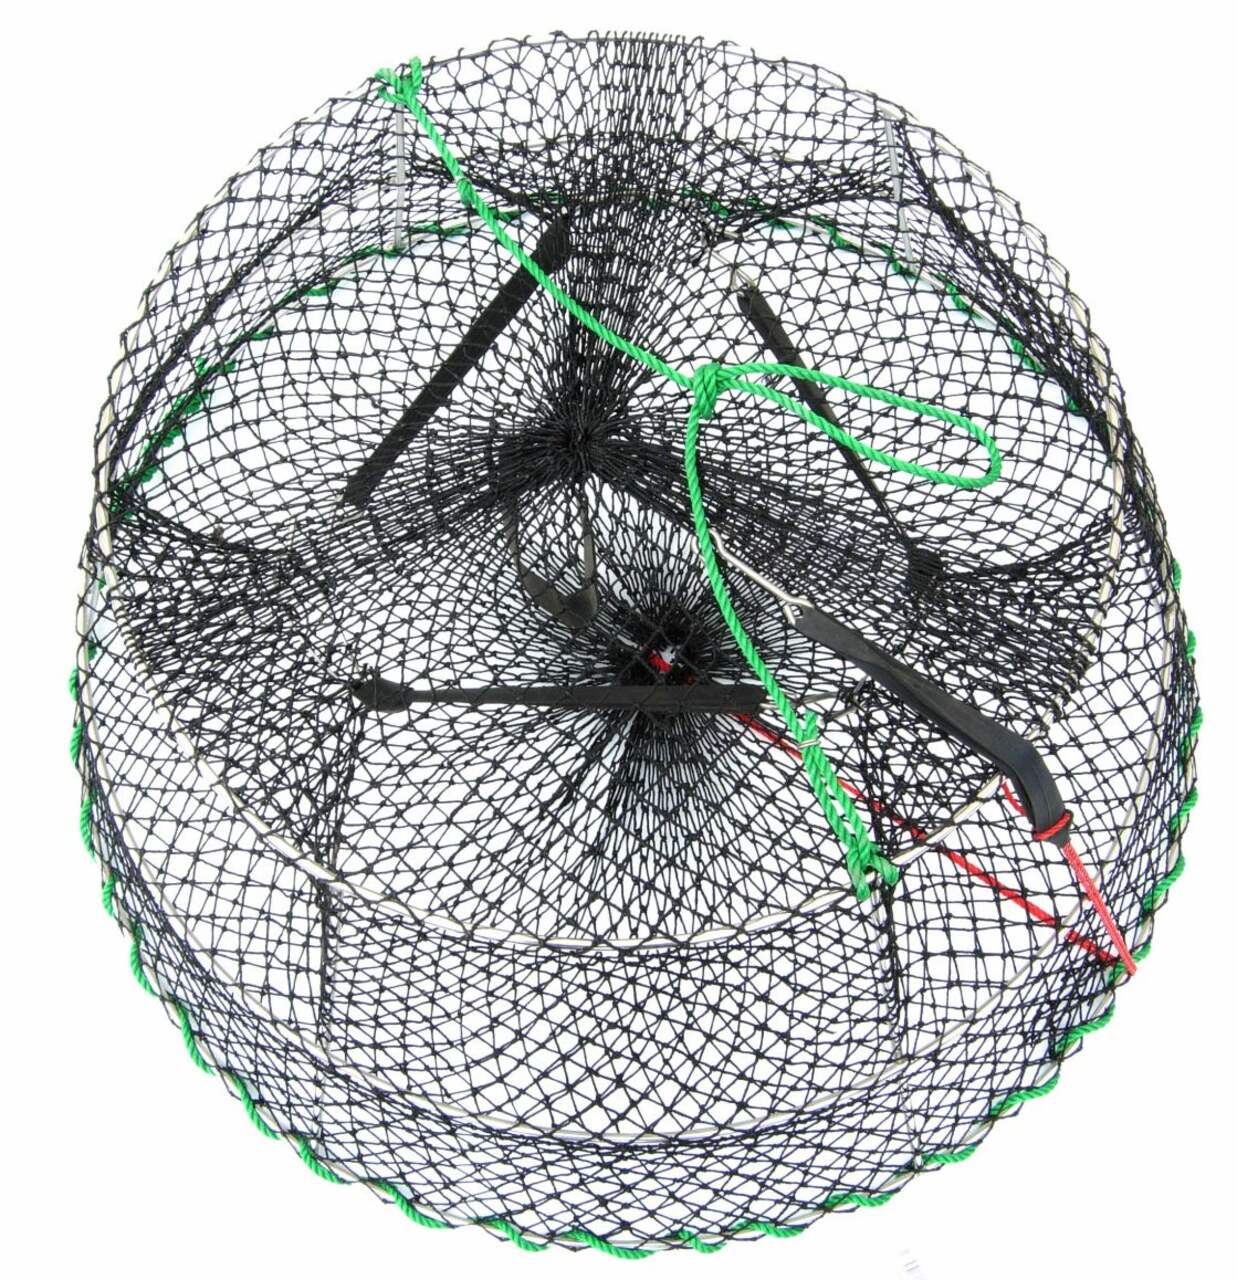 Sea King Stainless Steel Deluxe Round Prawn Trap, Collapsible